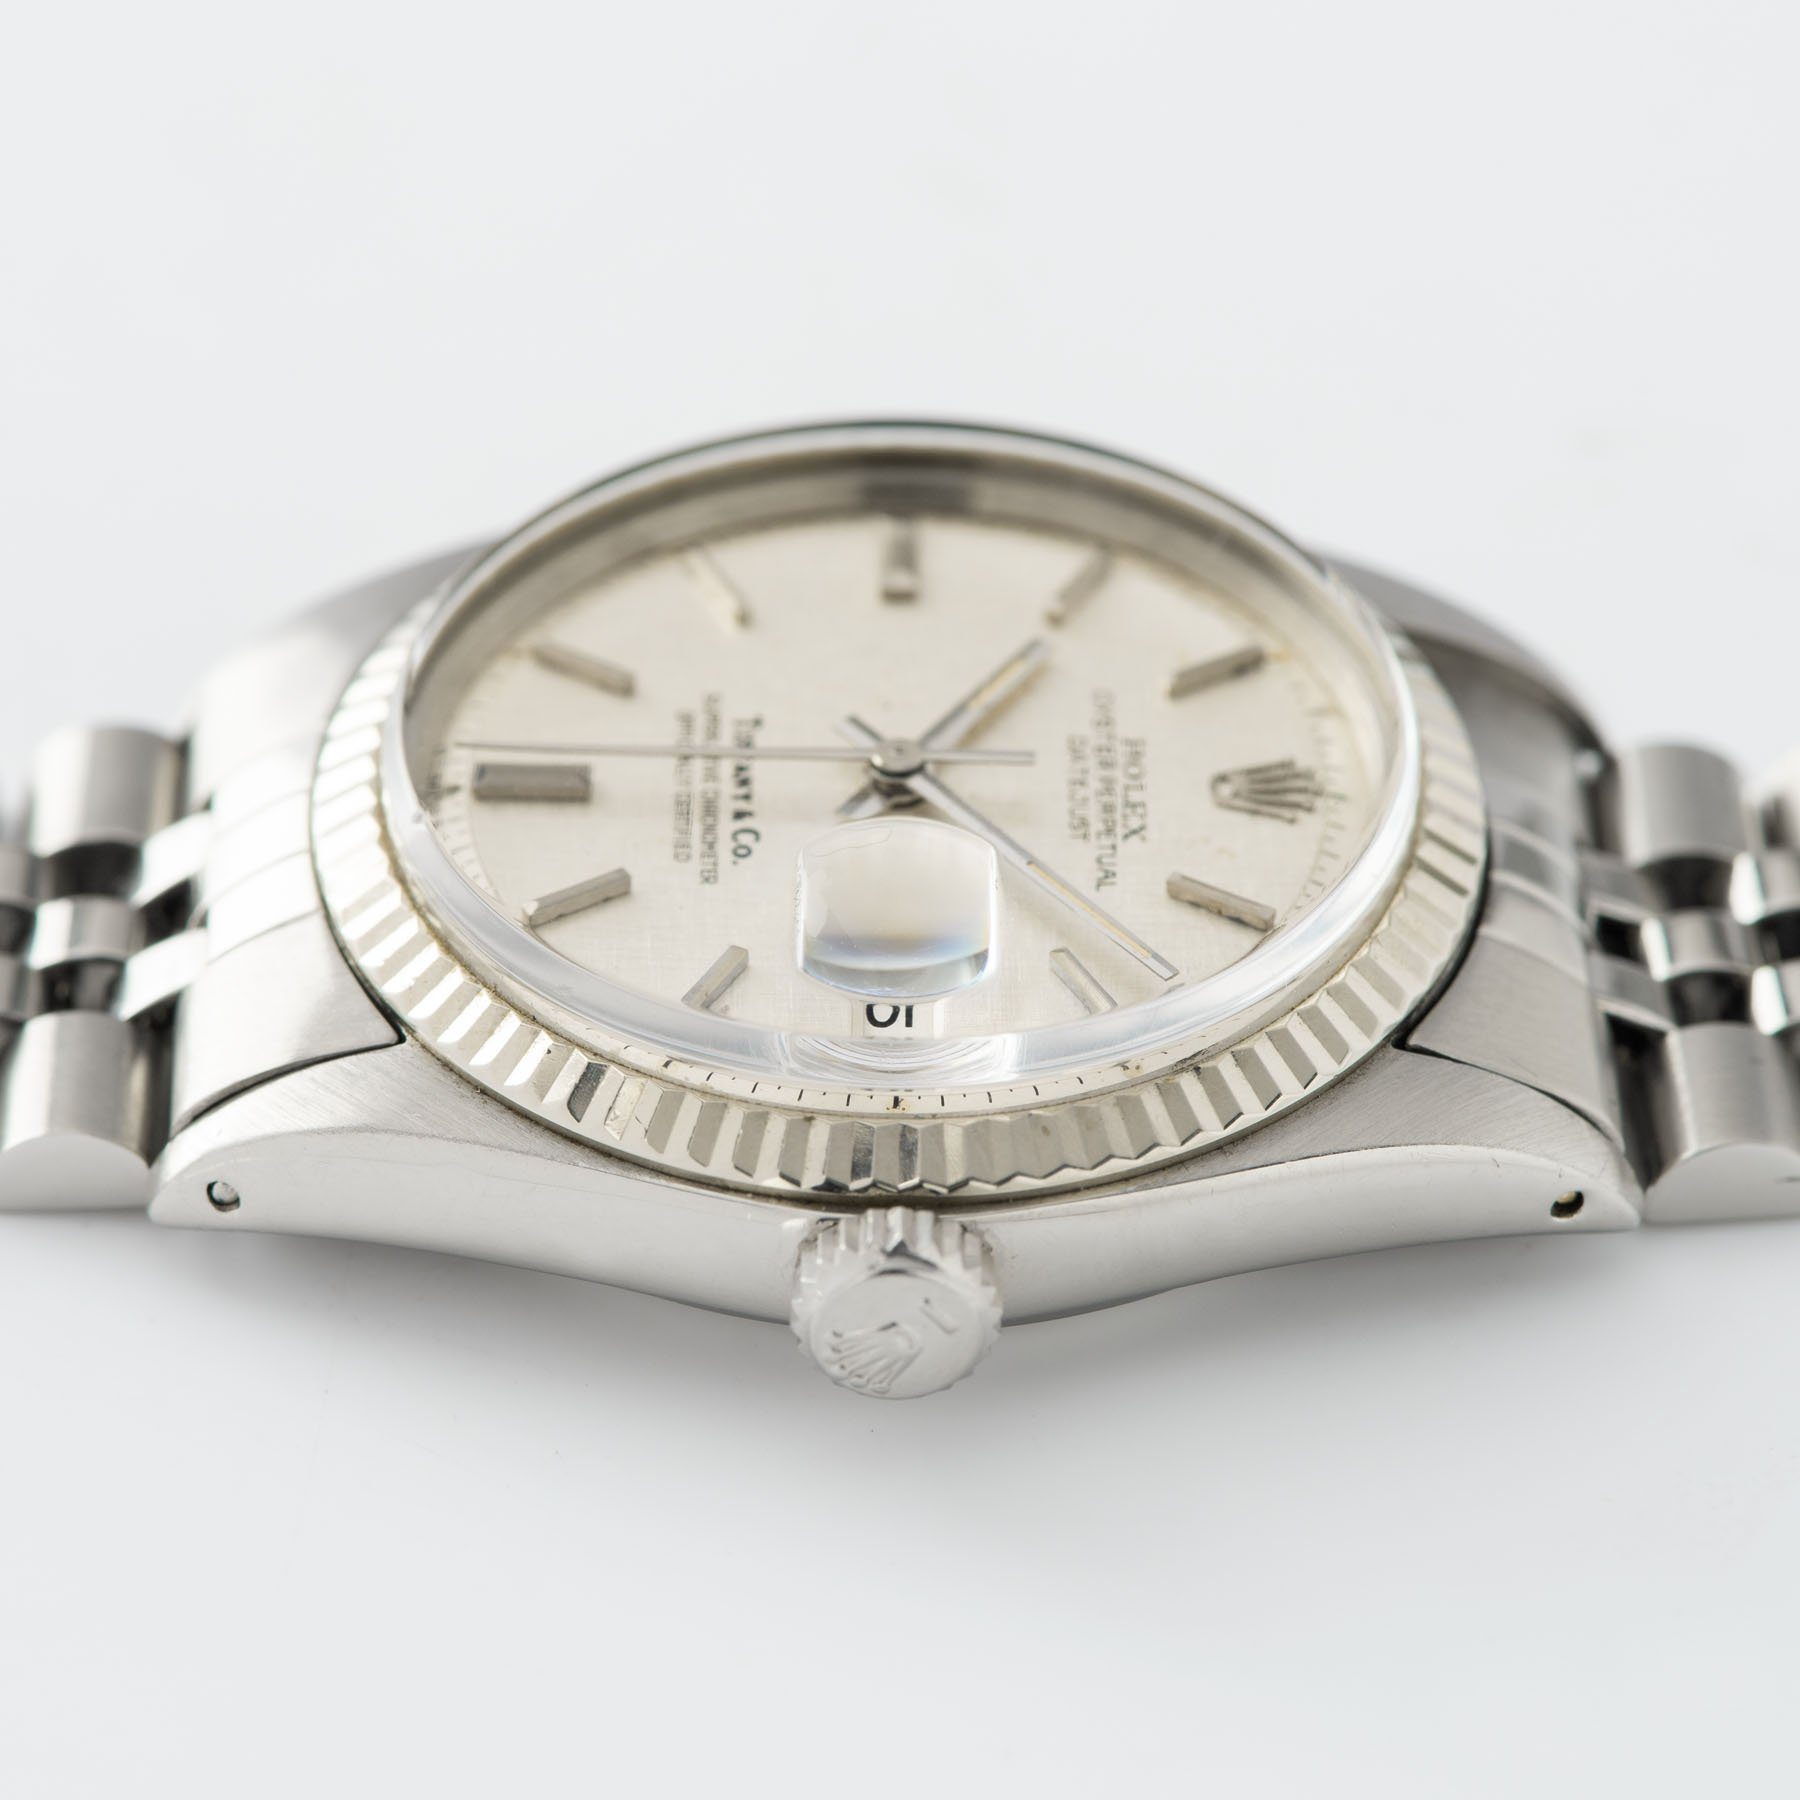 Rolex Datejust Tiffany Dial Reference 1601